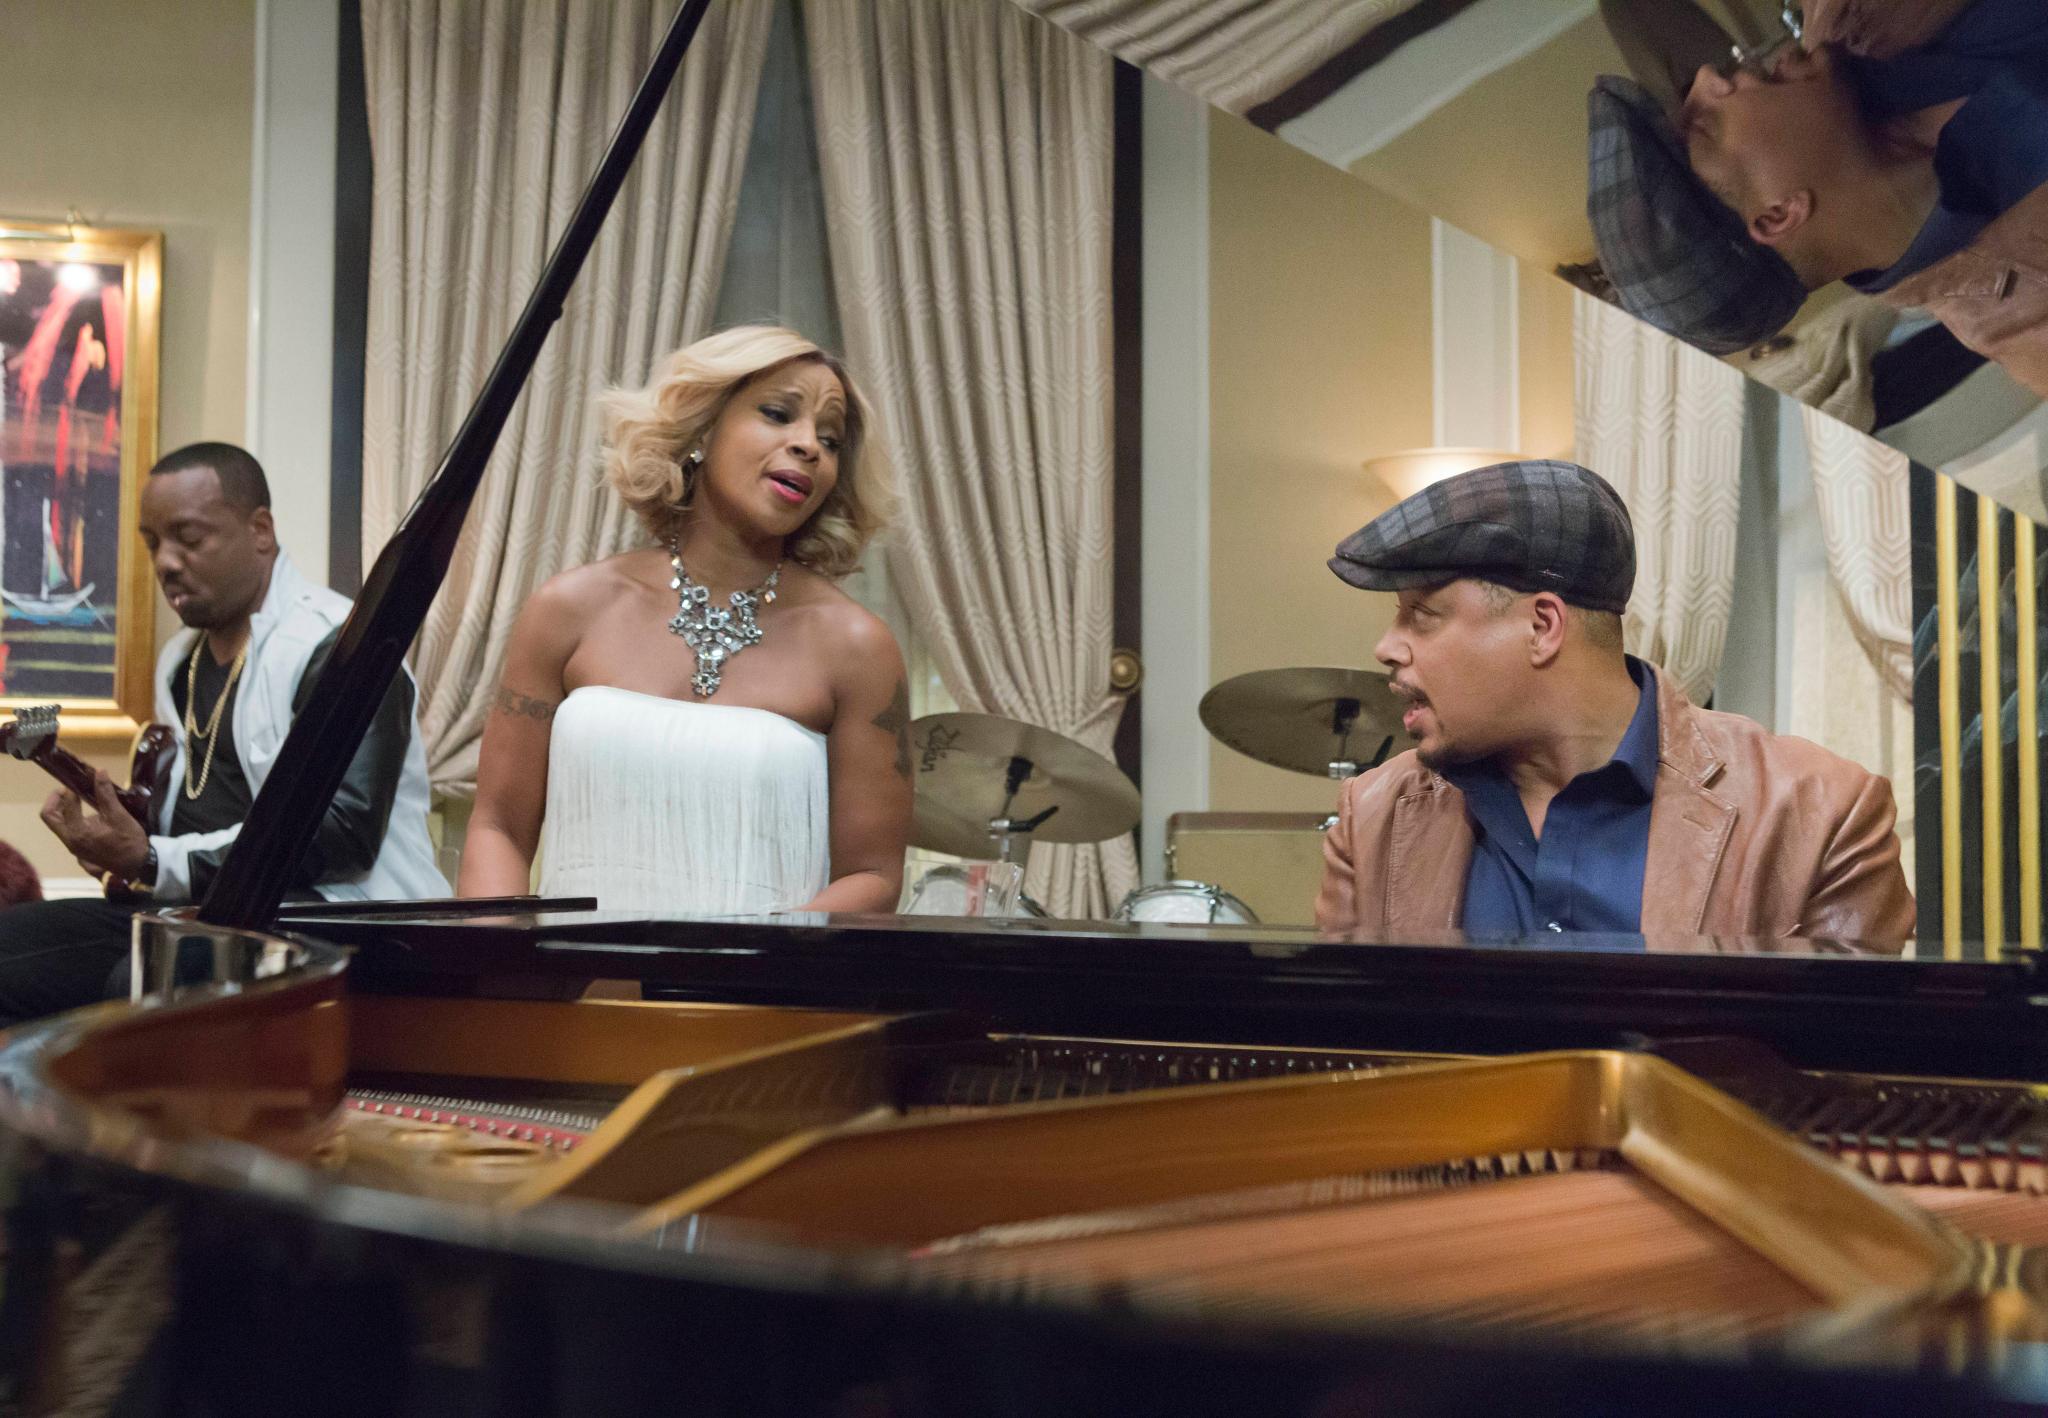 Get Your "Empire" Fix with a Sneak Peek of This Week's Episode
